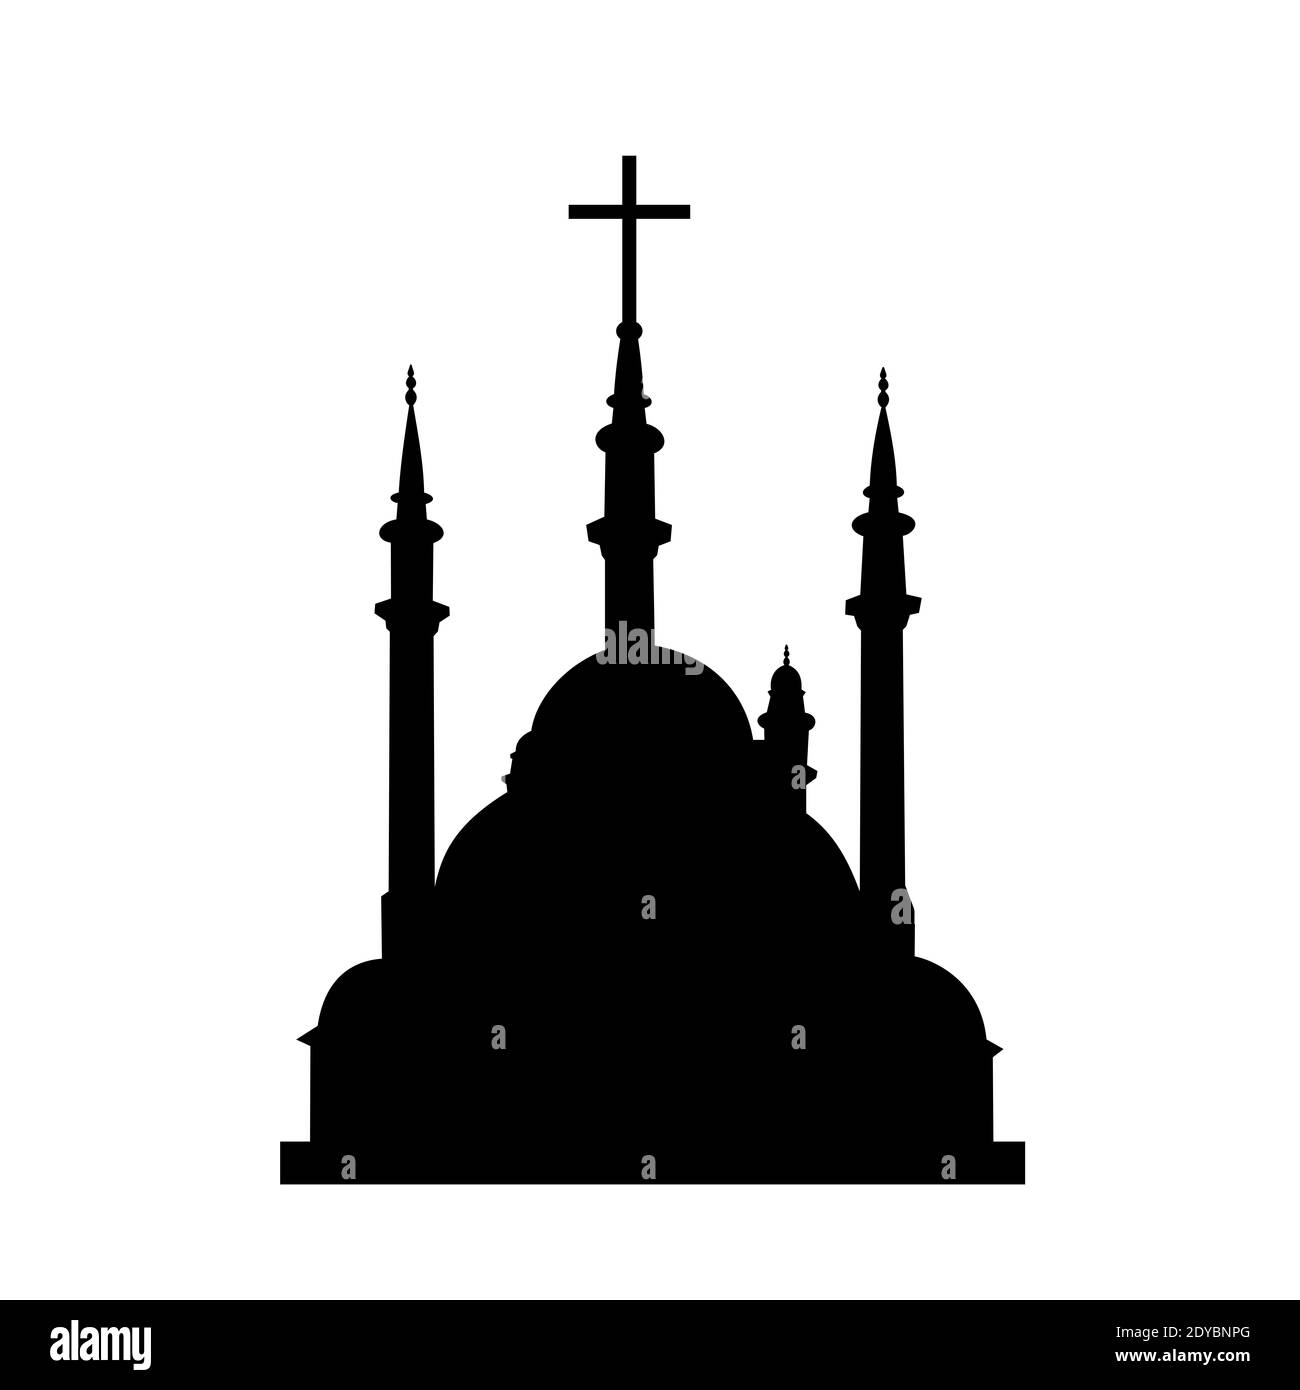 Sacral and religious building and architecture of Islam and Christianity - islamic and muslim mosque with minaret and Christian cross on the top. Unit Stock Photo